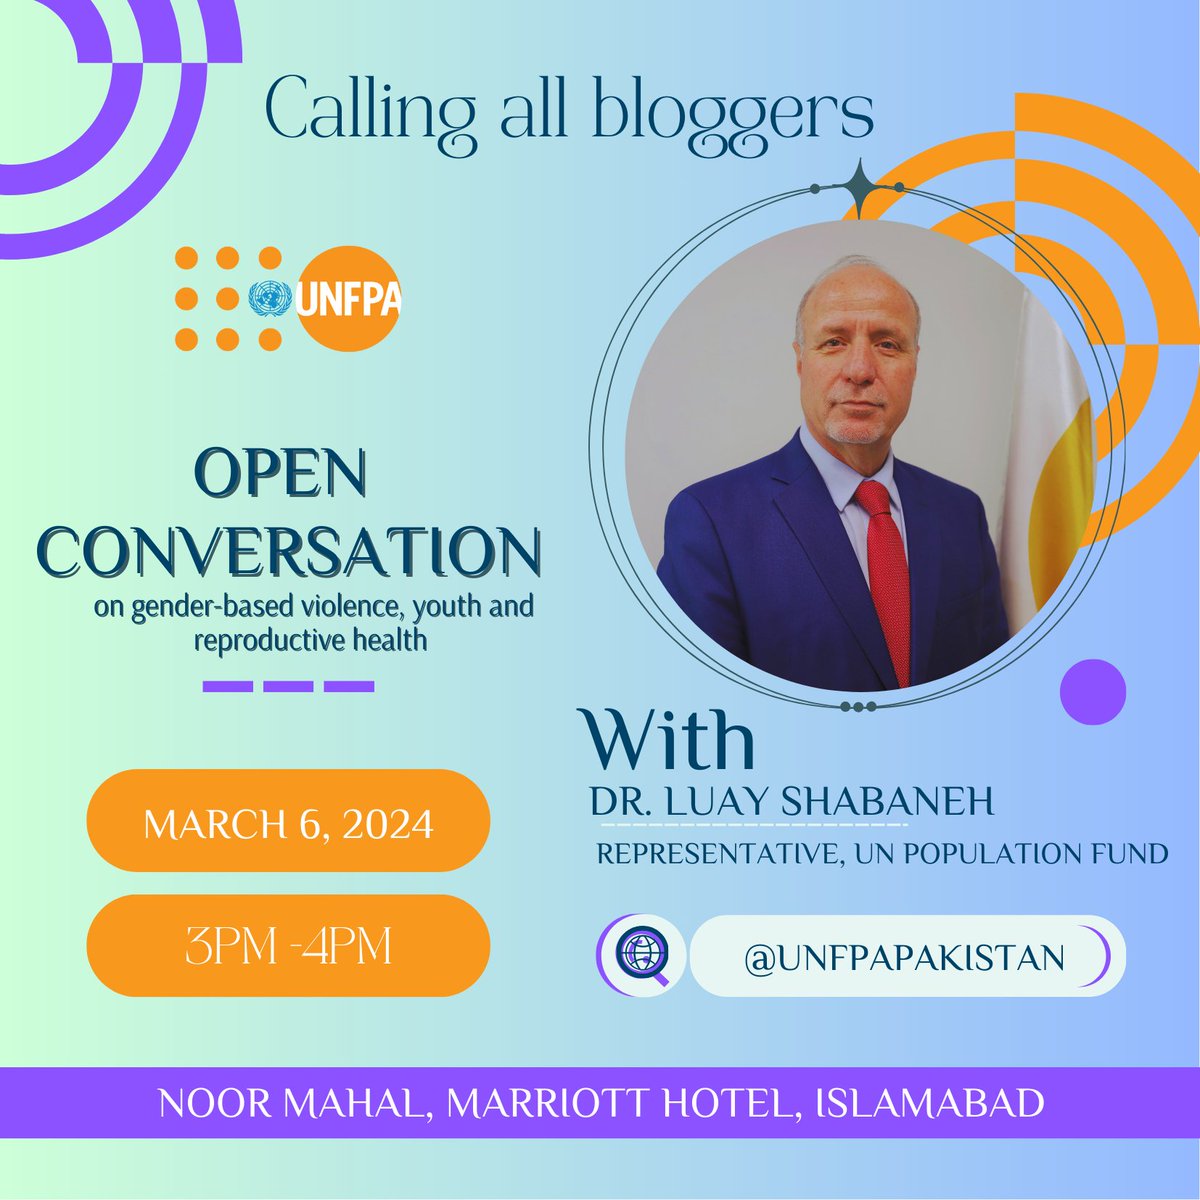 Calling all bloggers, campaigners and social media activists to join the open conversation with Dr. @ShabanehLuay on March 6 at 3pm. #IWD2024 #InvestInWomen